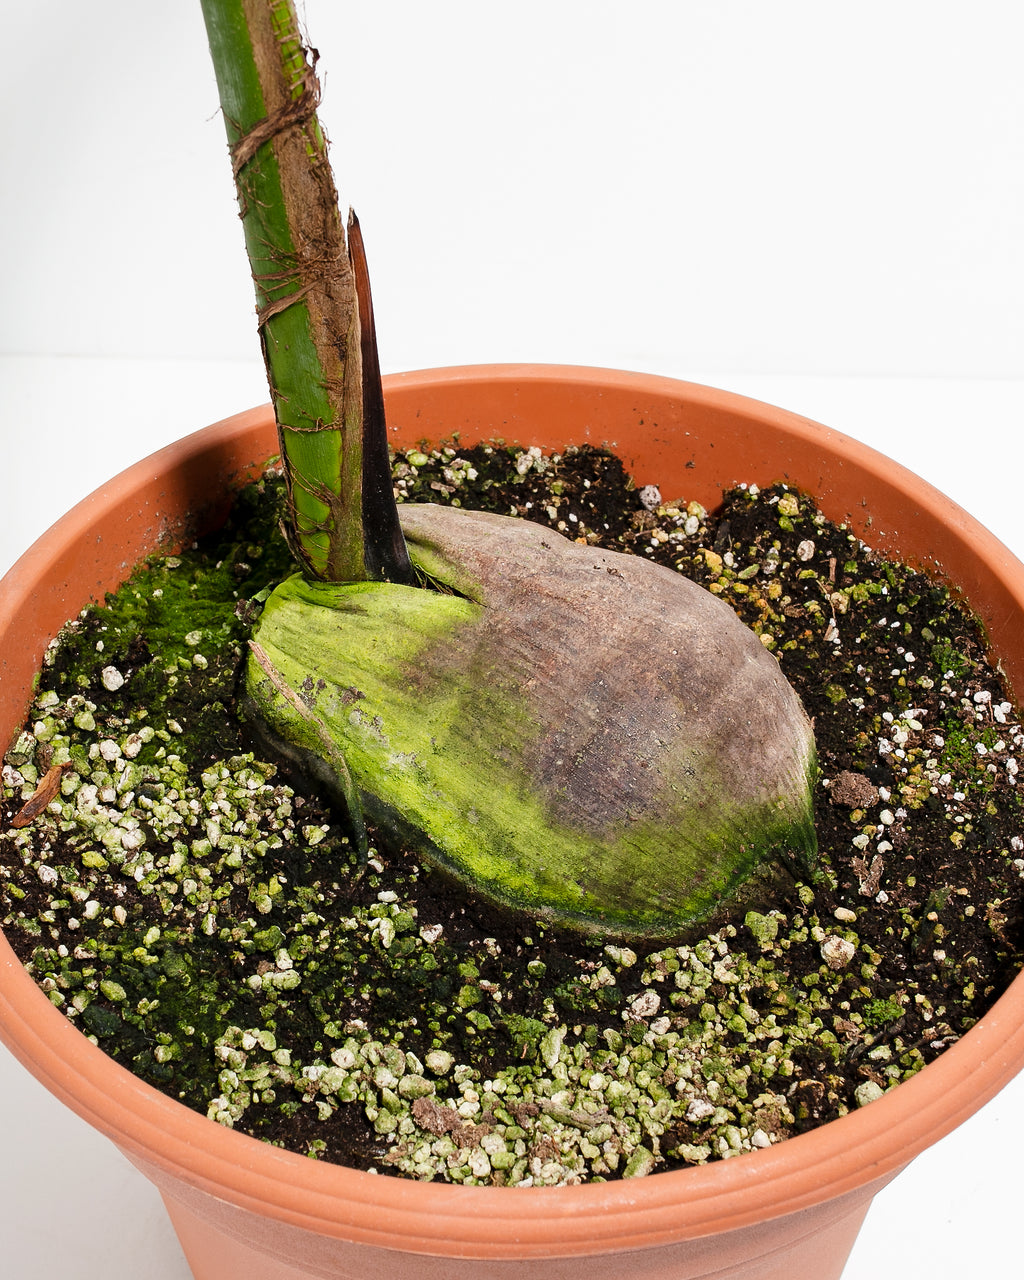 How to Use Sphagnum Moss for Your House Plants - The Urban Sprout